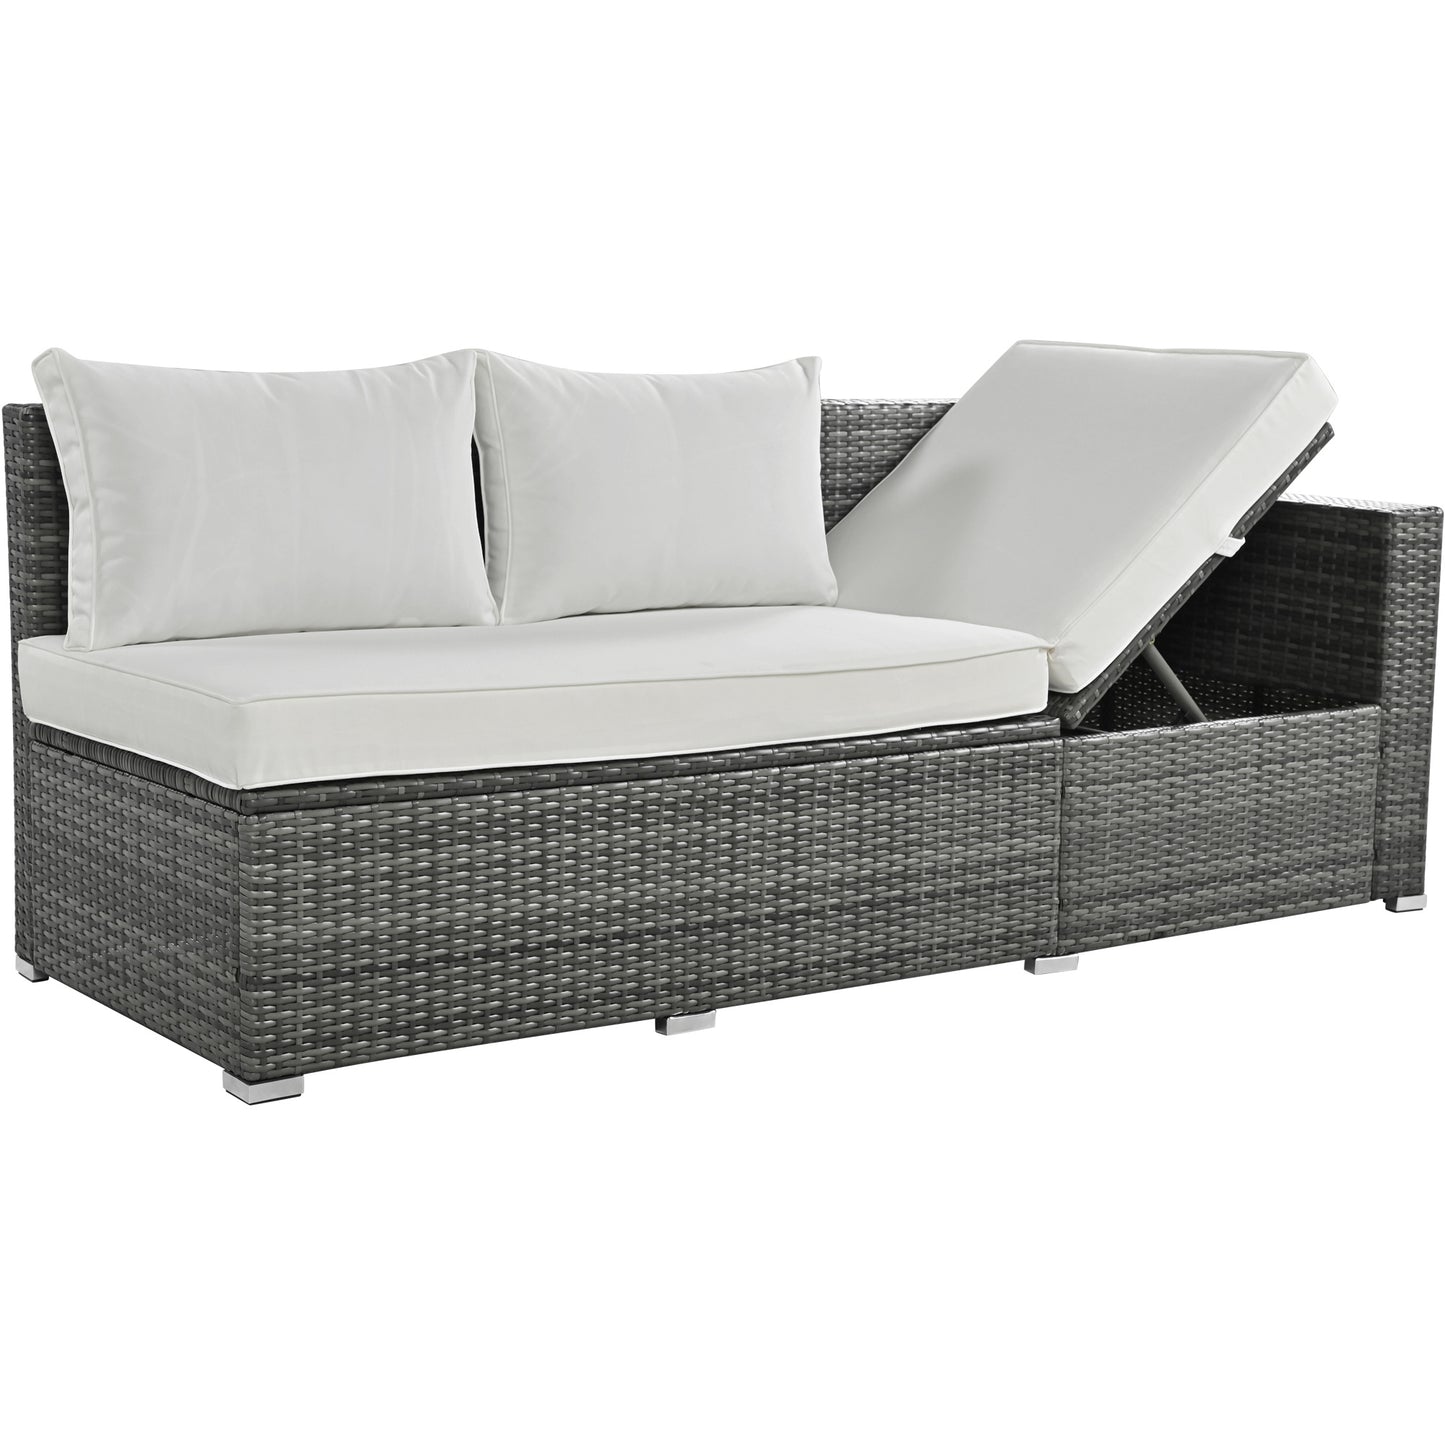 Outdoor 6-Piece All Weather PE Rattan Sofa Set, Storage Box, Removable Covers and Tempered Glass Top Table